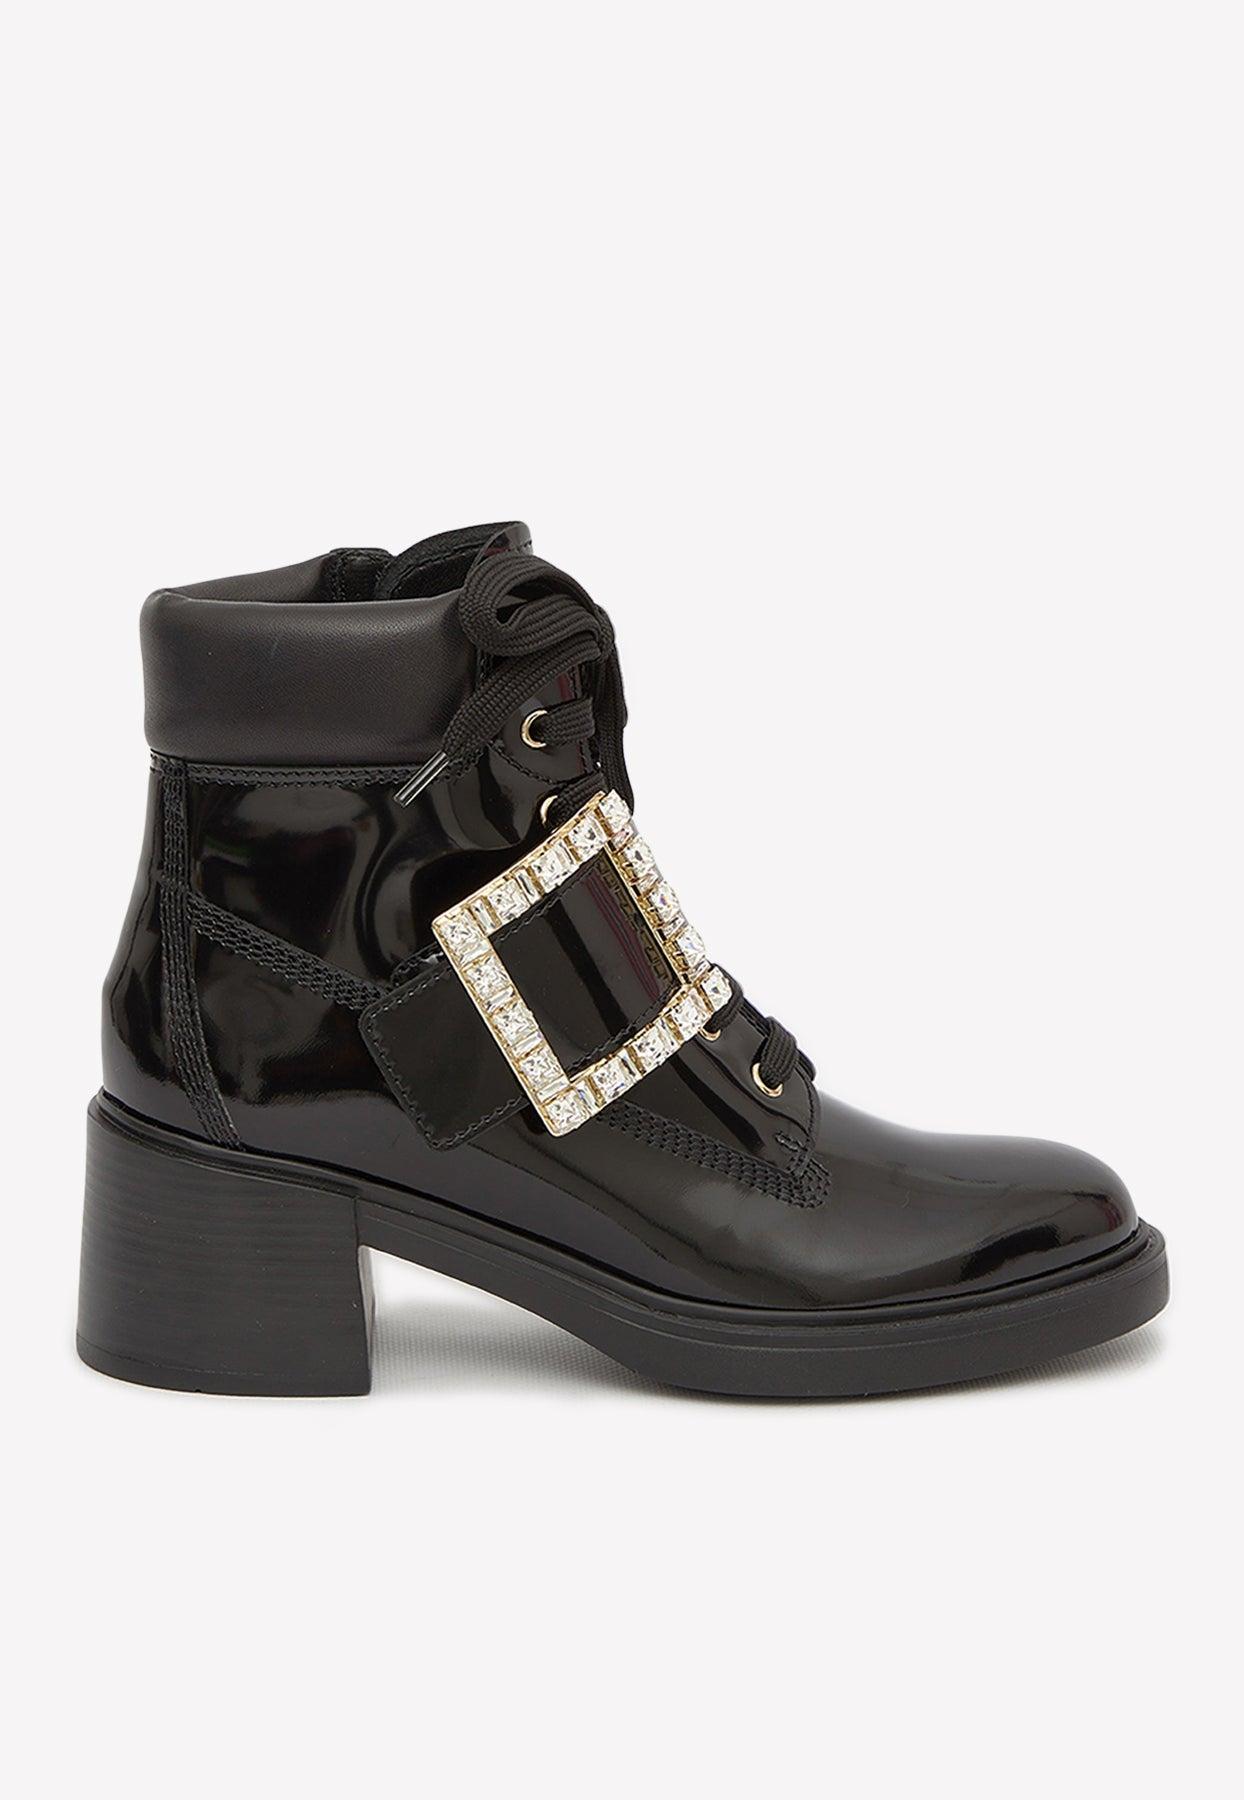 Roger Vivier Viv' Rangers Leather Boots in Black | Lyst Canada